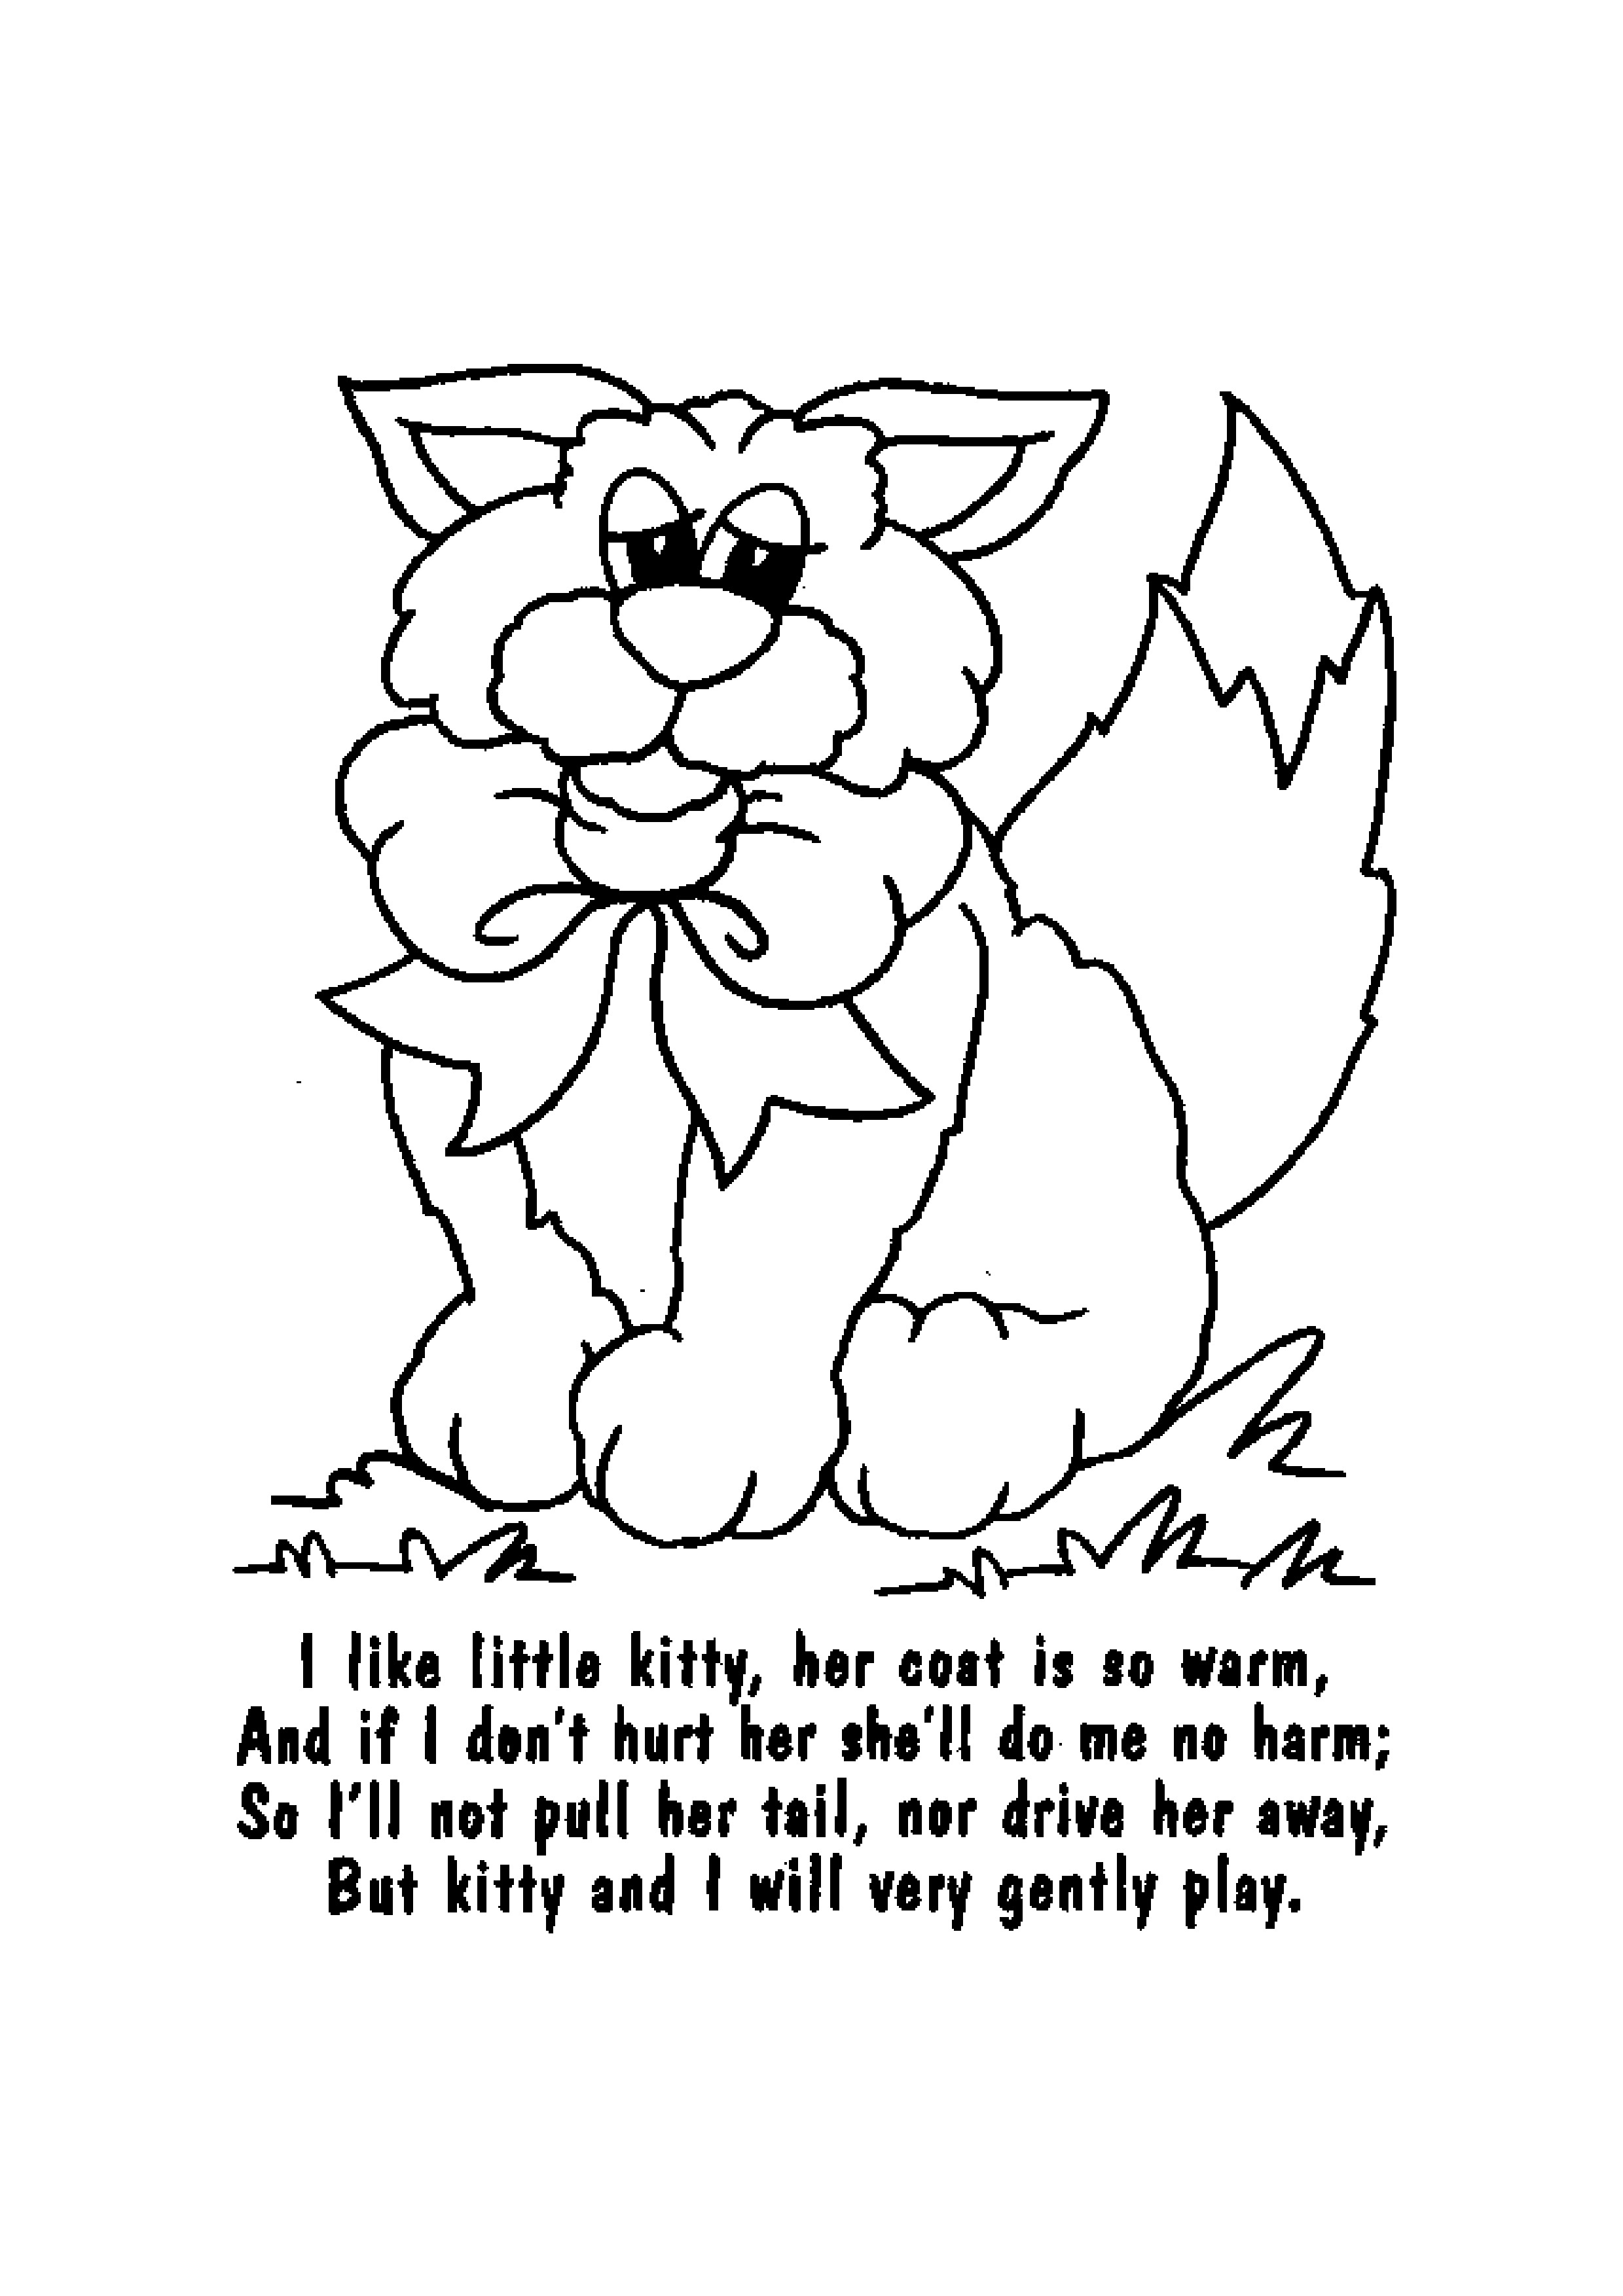 Nursery Rhyme Coloring Sheets For Preschool Coloring Pages